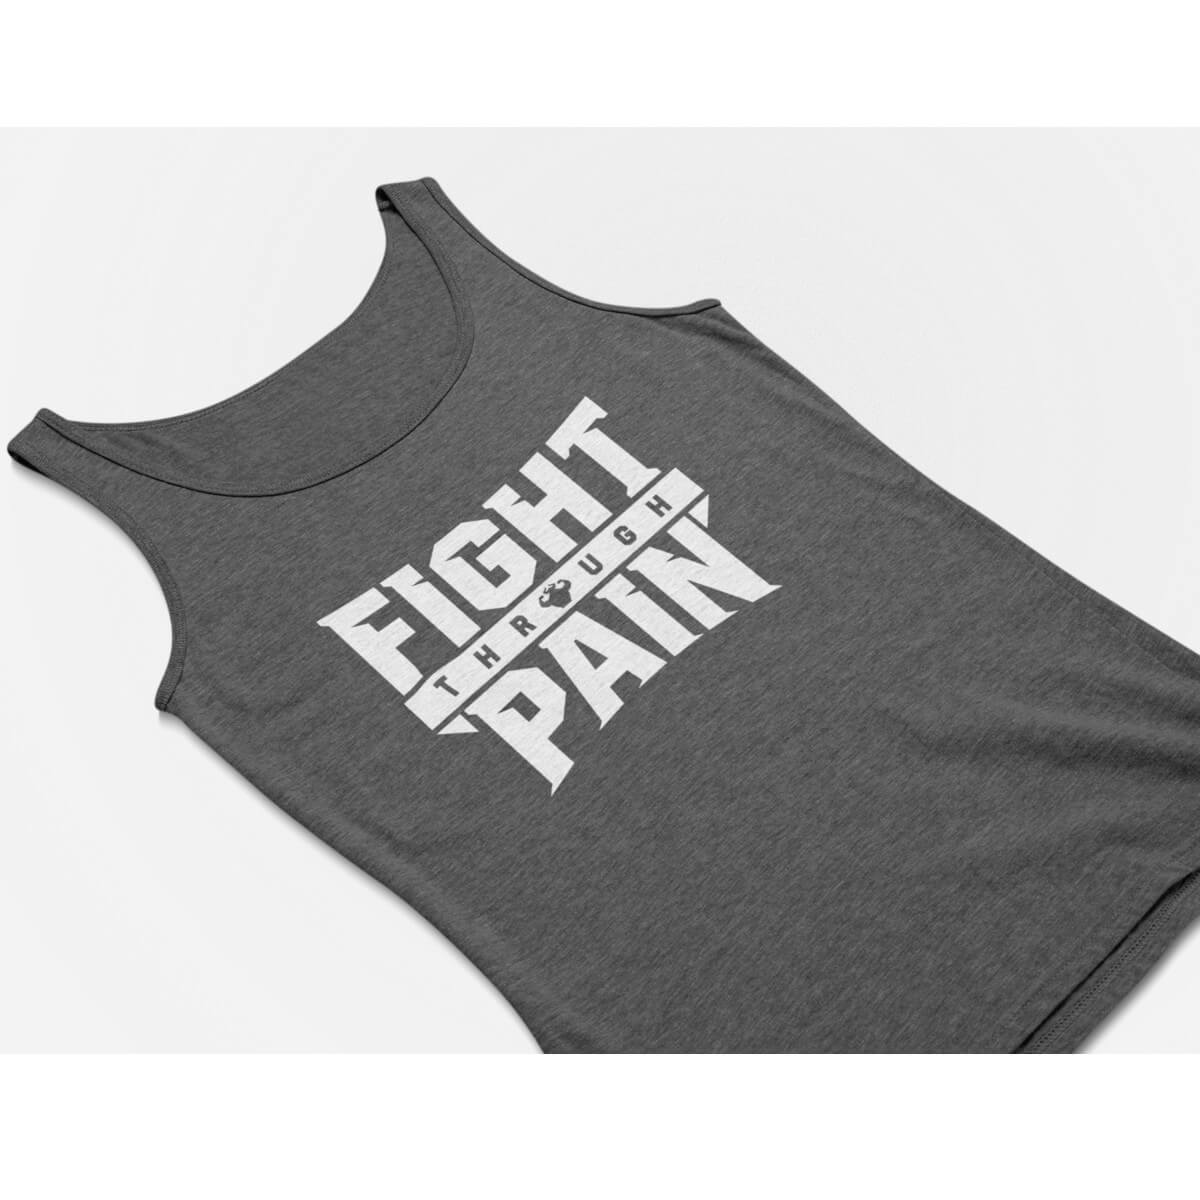 Fight Through Pain Men's Tank Top Tank - Strong and Humble Apparel